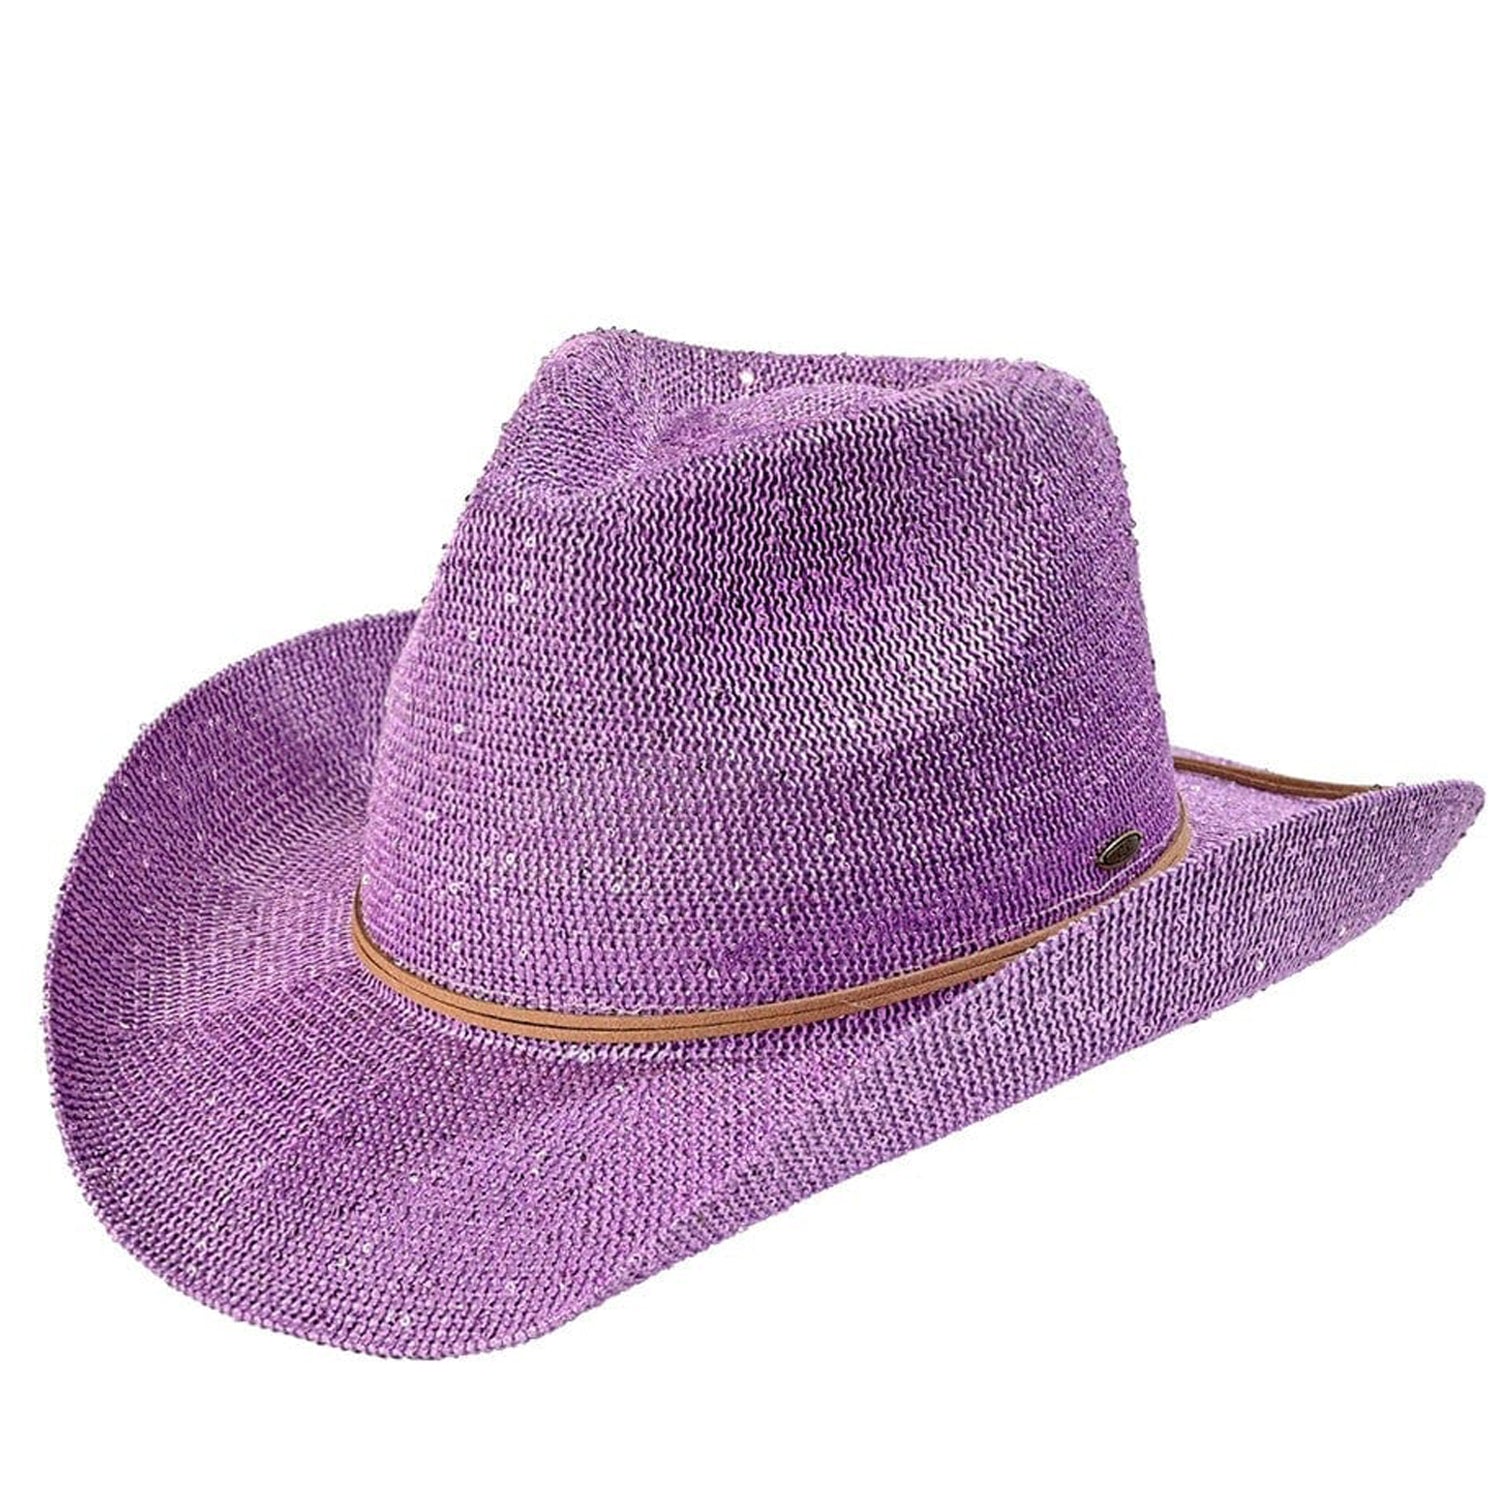 CBC-03 Cowgirl Hat with Glitter Lavender